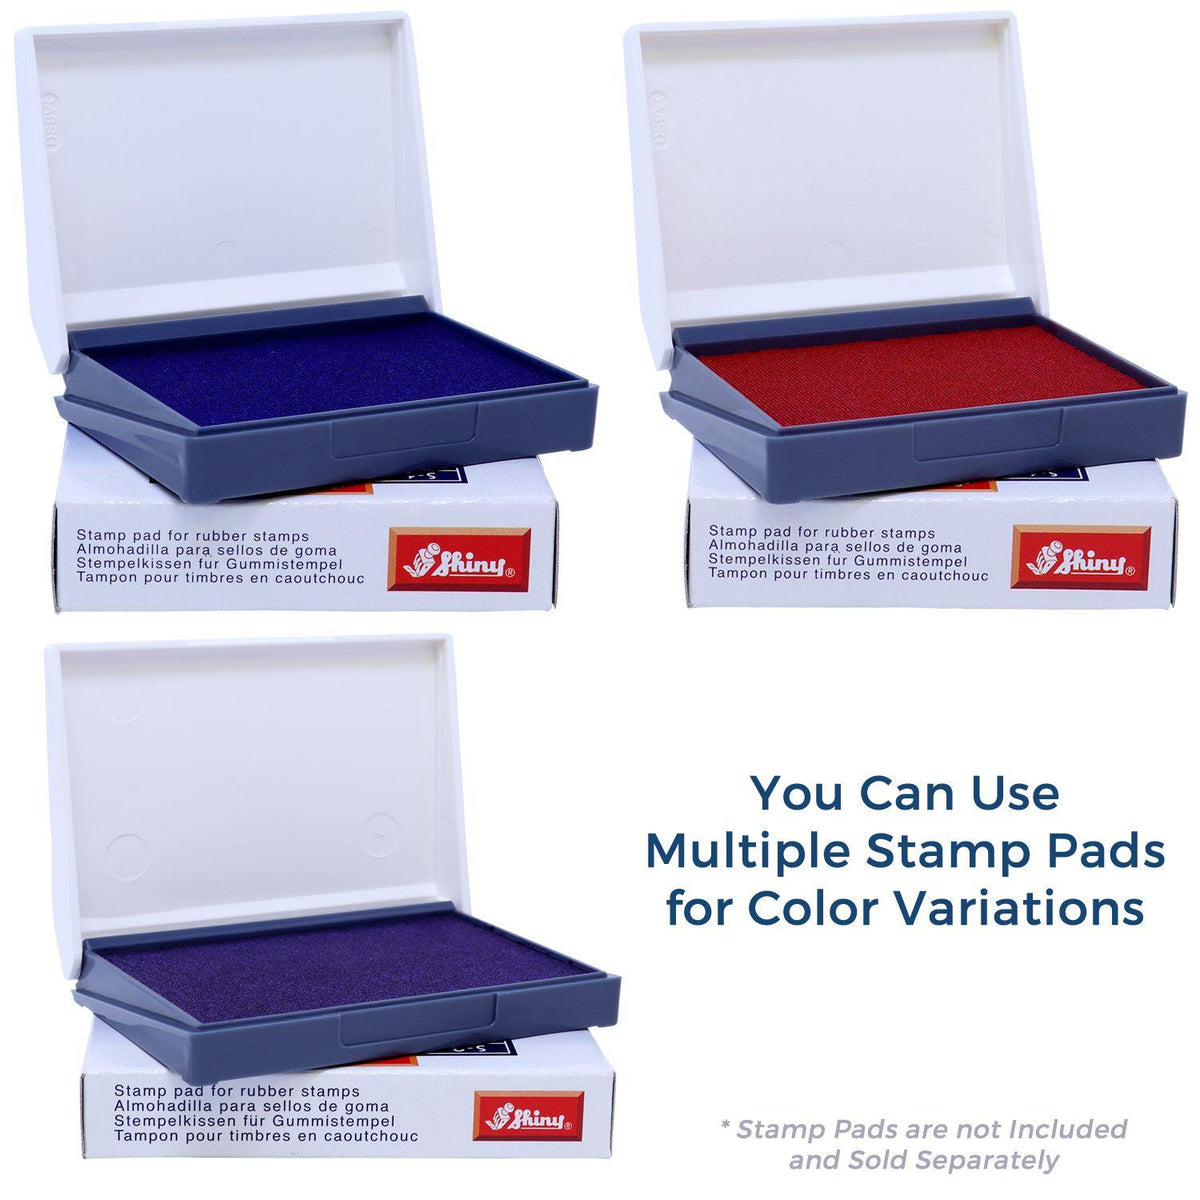 Stamp Pads for This Envelop has been Sealed Rubber Stamp Available